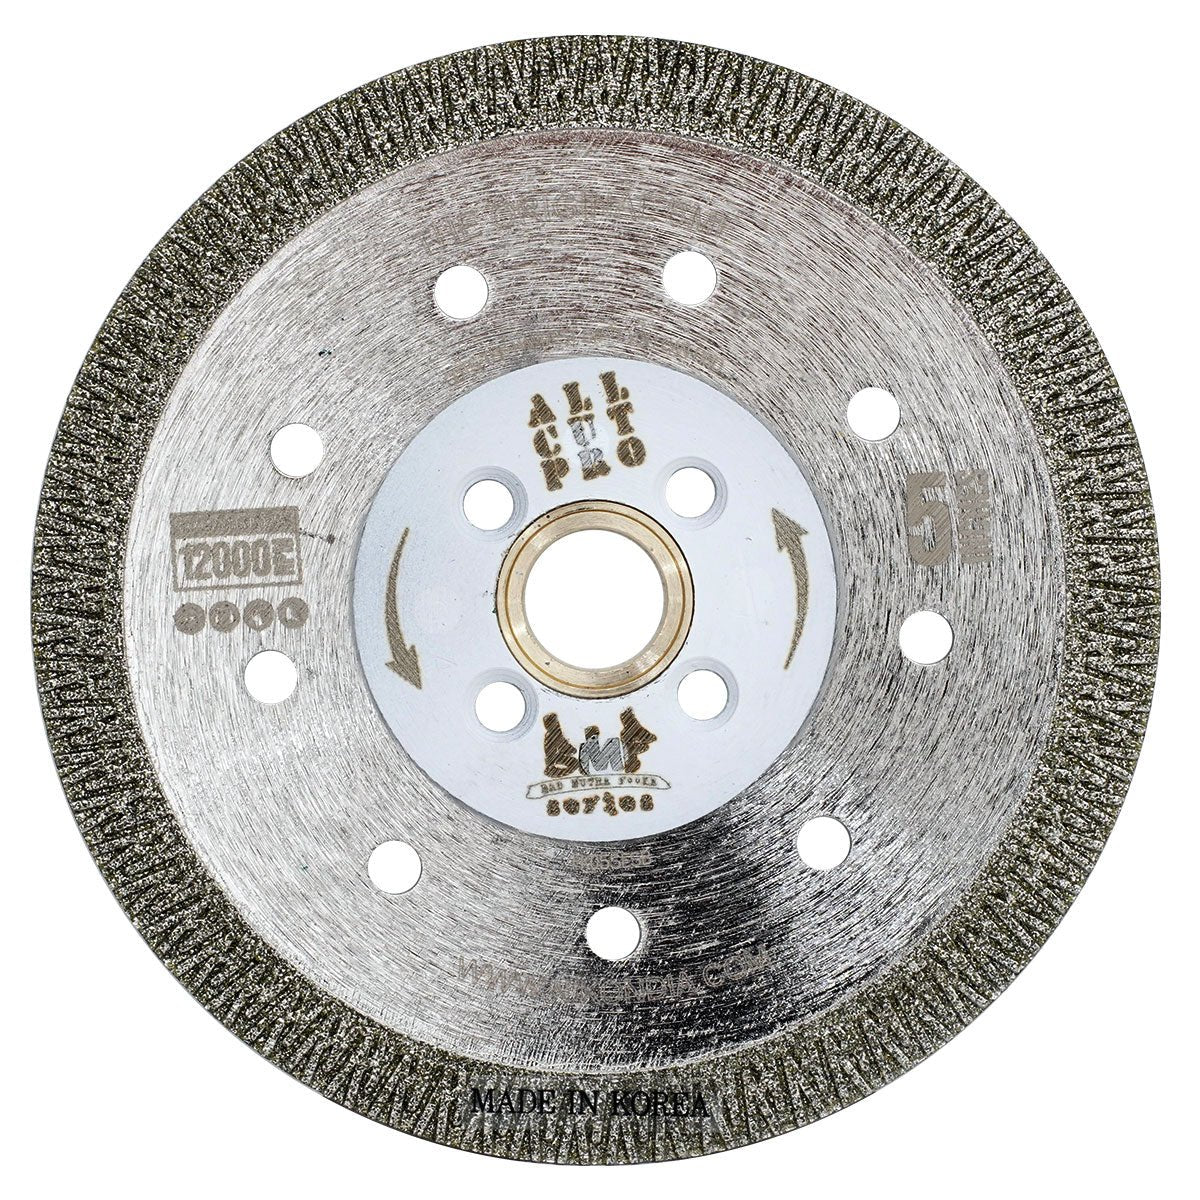 Diamond Disc For Glass Cutting - Popple Store